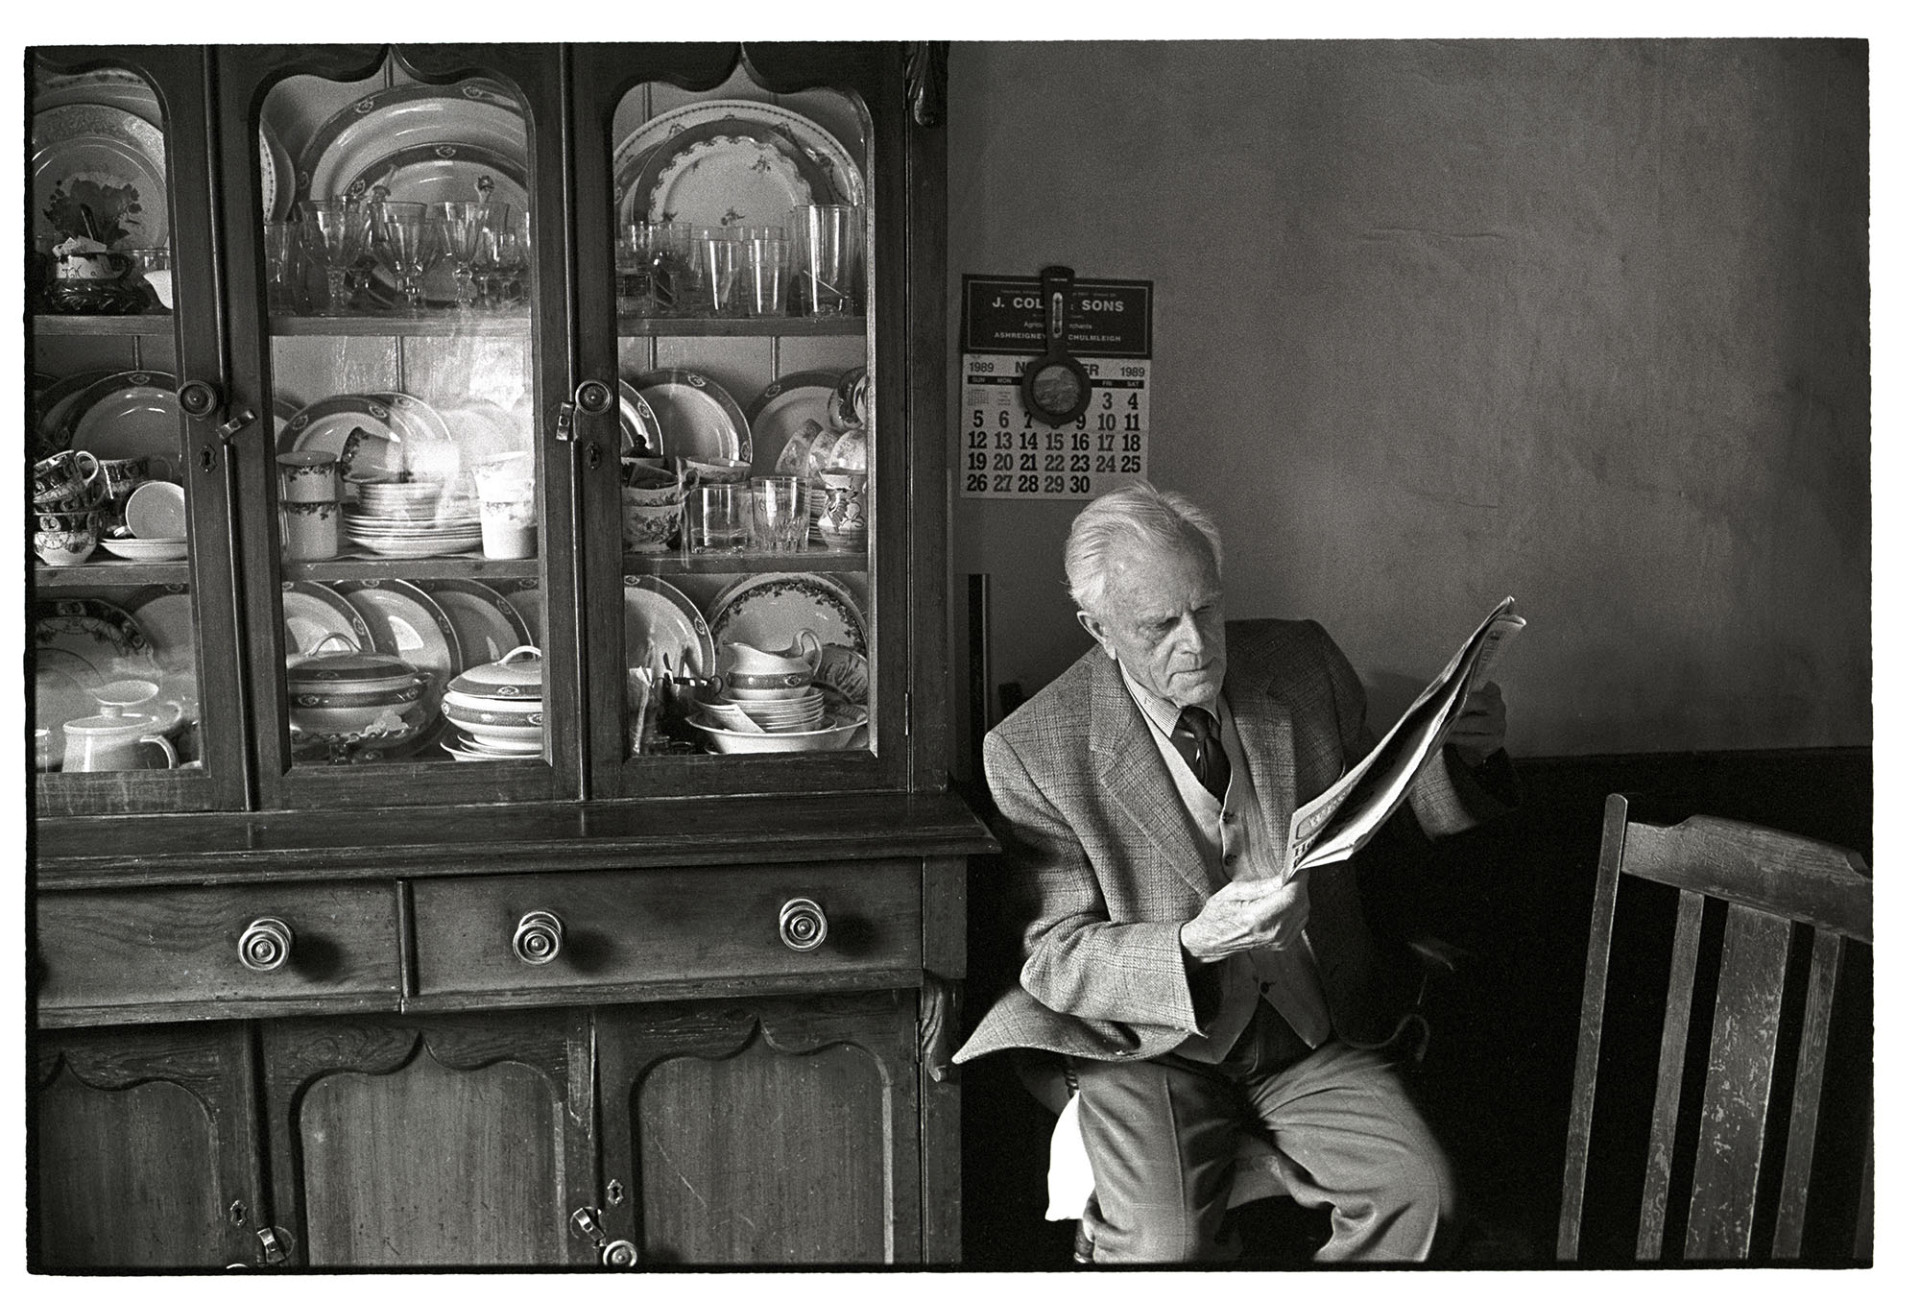 Man reading seated next to dresser with china, Dresser made in Lapford. 
[Ron Jury sat reading a newspaper next to a wooden dresser filled with china, in a house at Leigh Road, Chulmleigh. A calendar is hung on the wall behind him. The dresser was made in Lapford.]